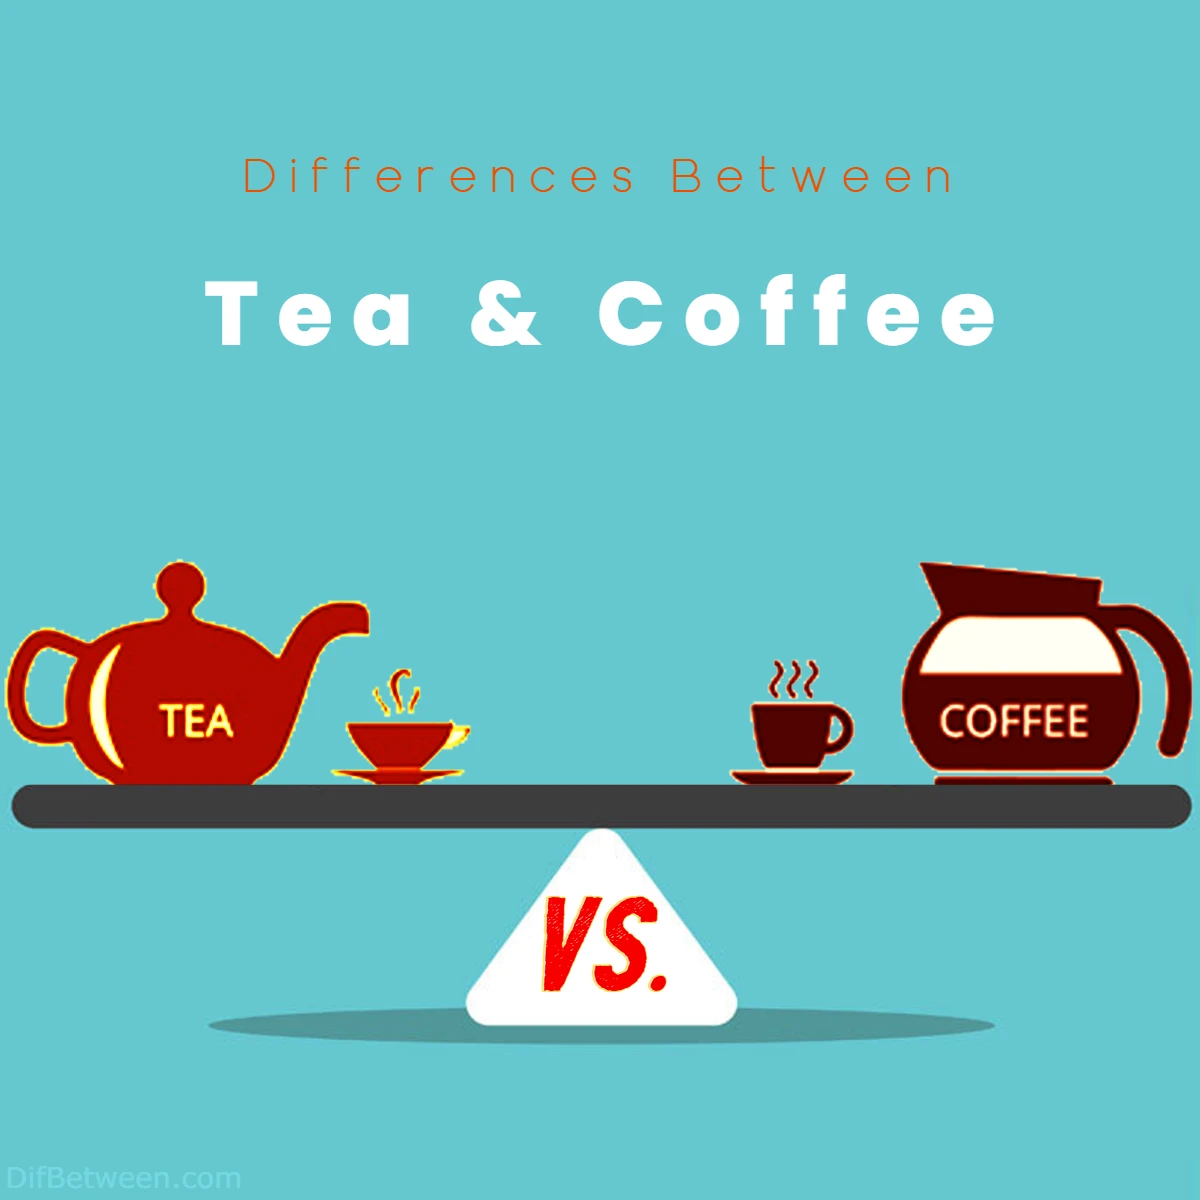 Differences Between Coffee and Tea